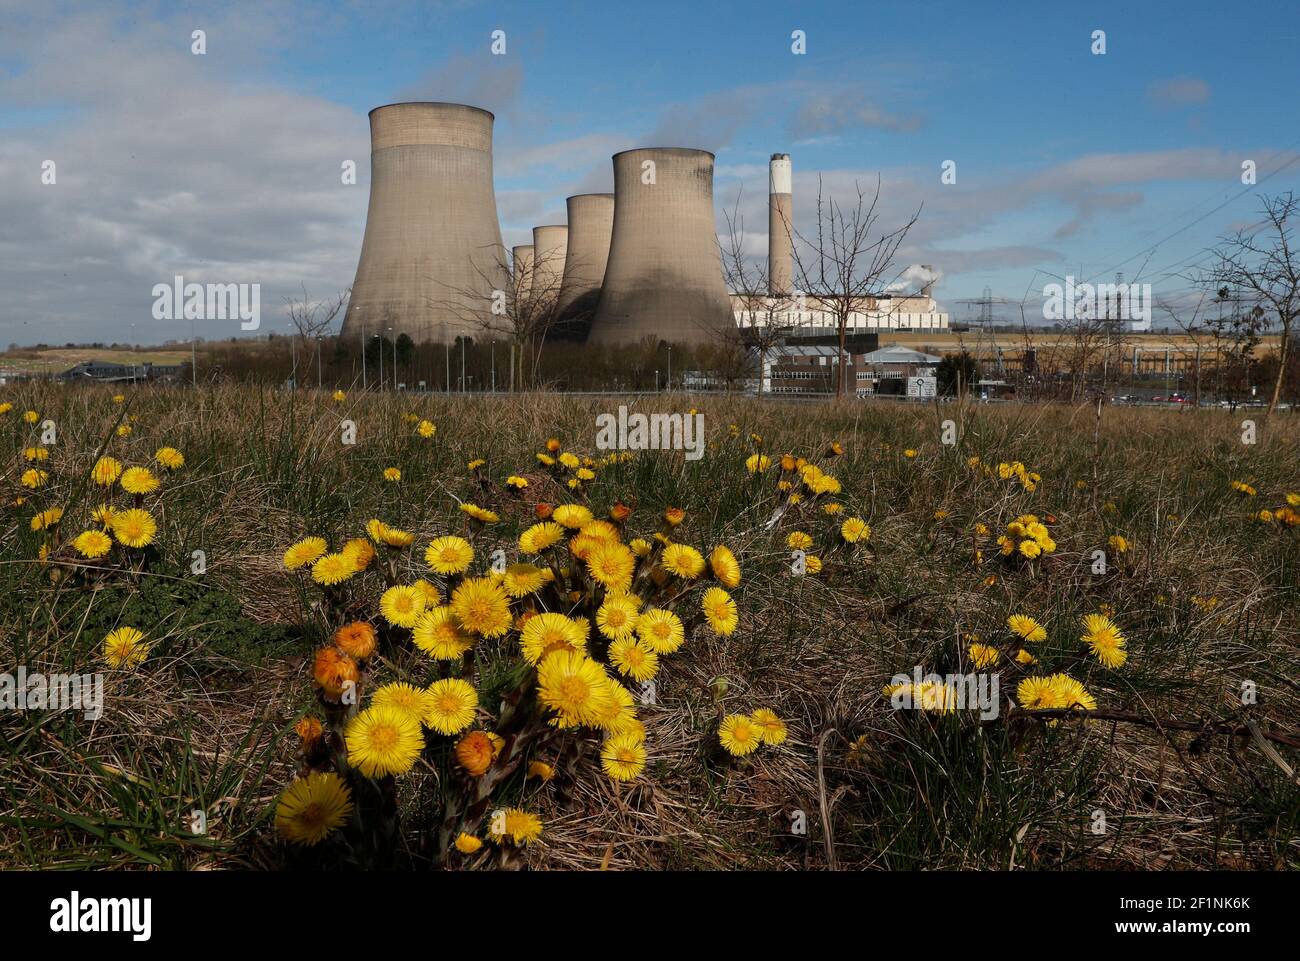 Ratcliffe-on-Soar, Nottinghamshire, UK. 9th March 2021. Flowers grow near Ratcliffe-on-Soar Power Station as Rushcliffe Borough Council is to discuss an expression of interest for UniperÕs coal-powered Power Station site to accommodate a nuclear fusion reactor when it is decommissioned in 2025. Credit Darren Staples/Alamy Live News. Stock Photo